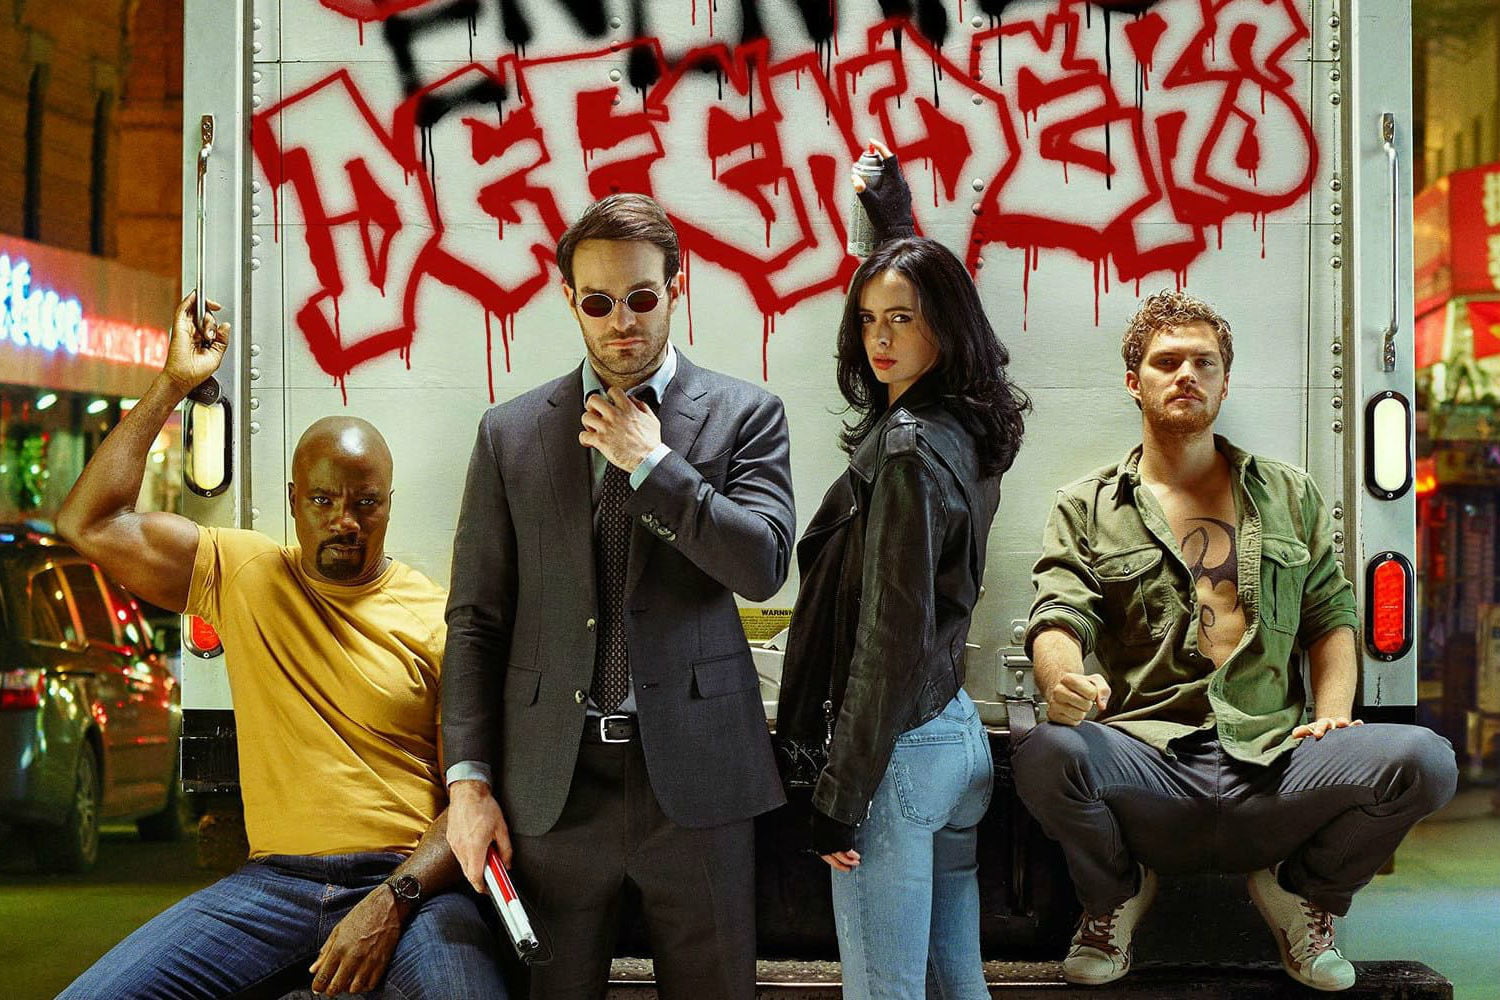 Which Marvel Group Do You Belong To? The Defenders1